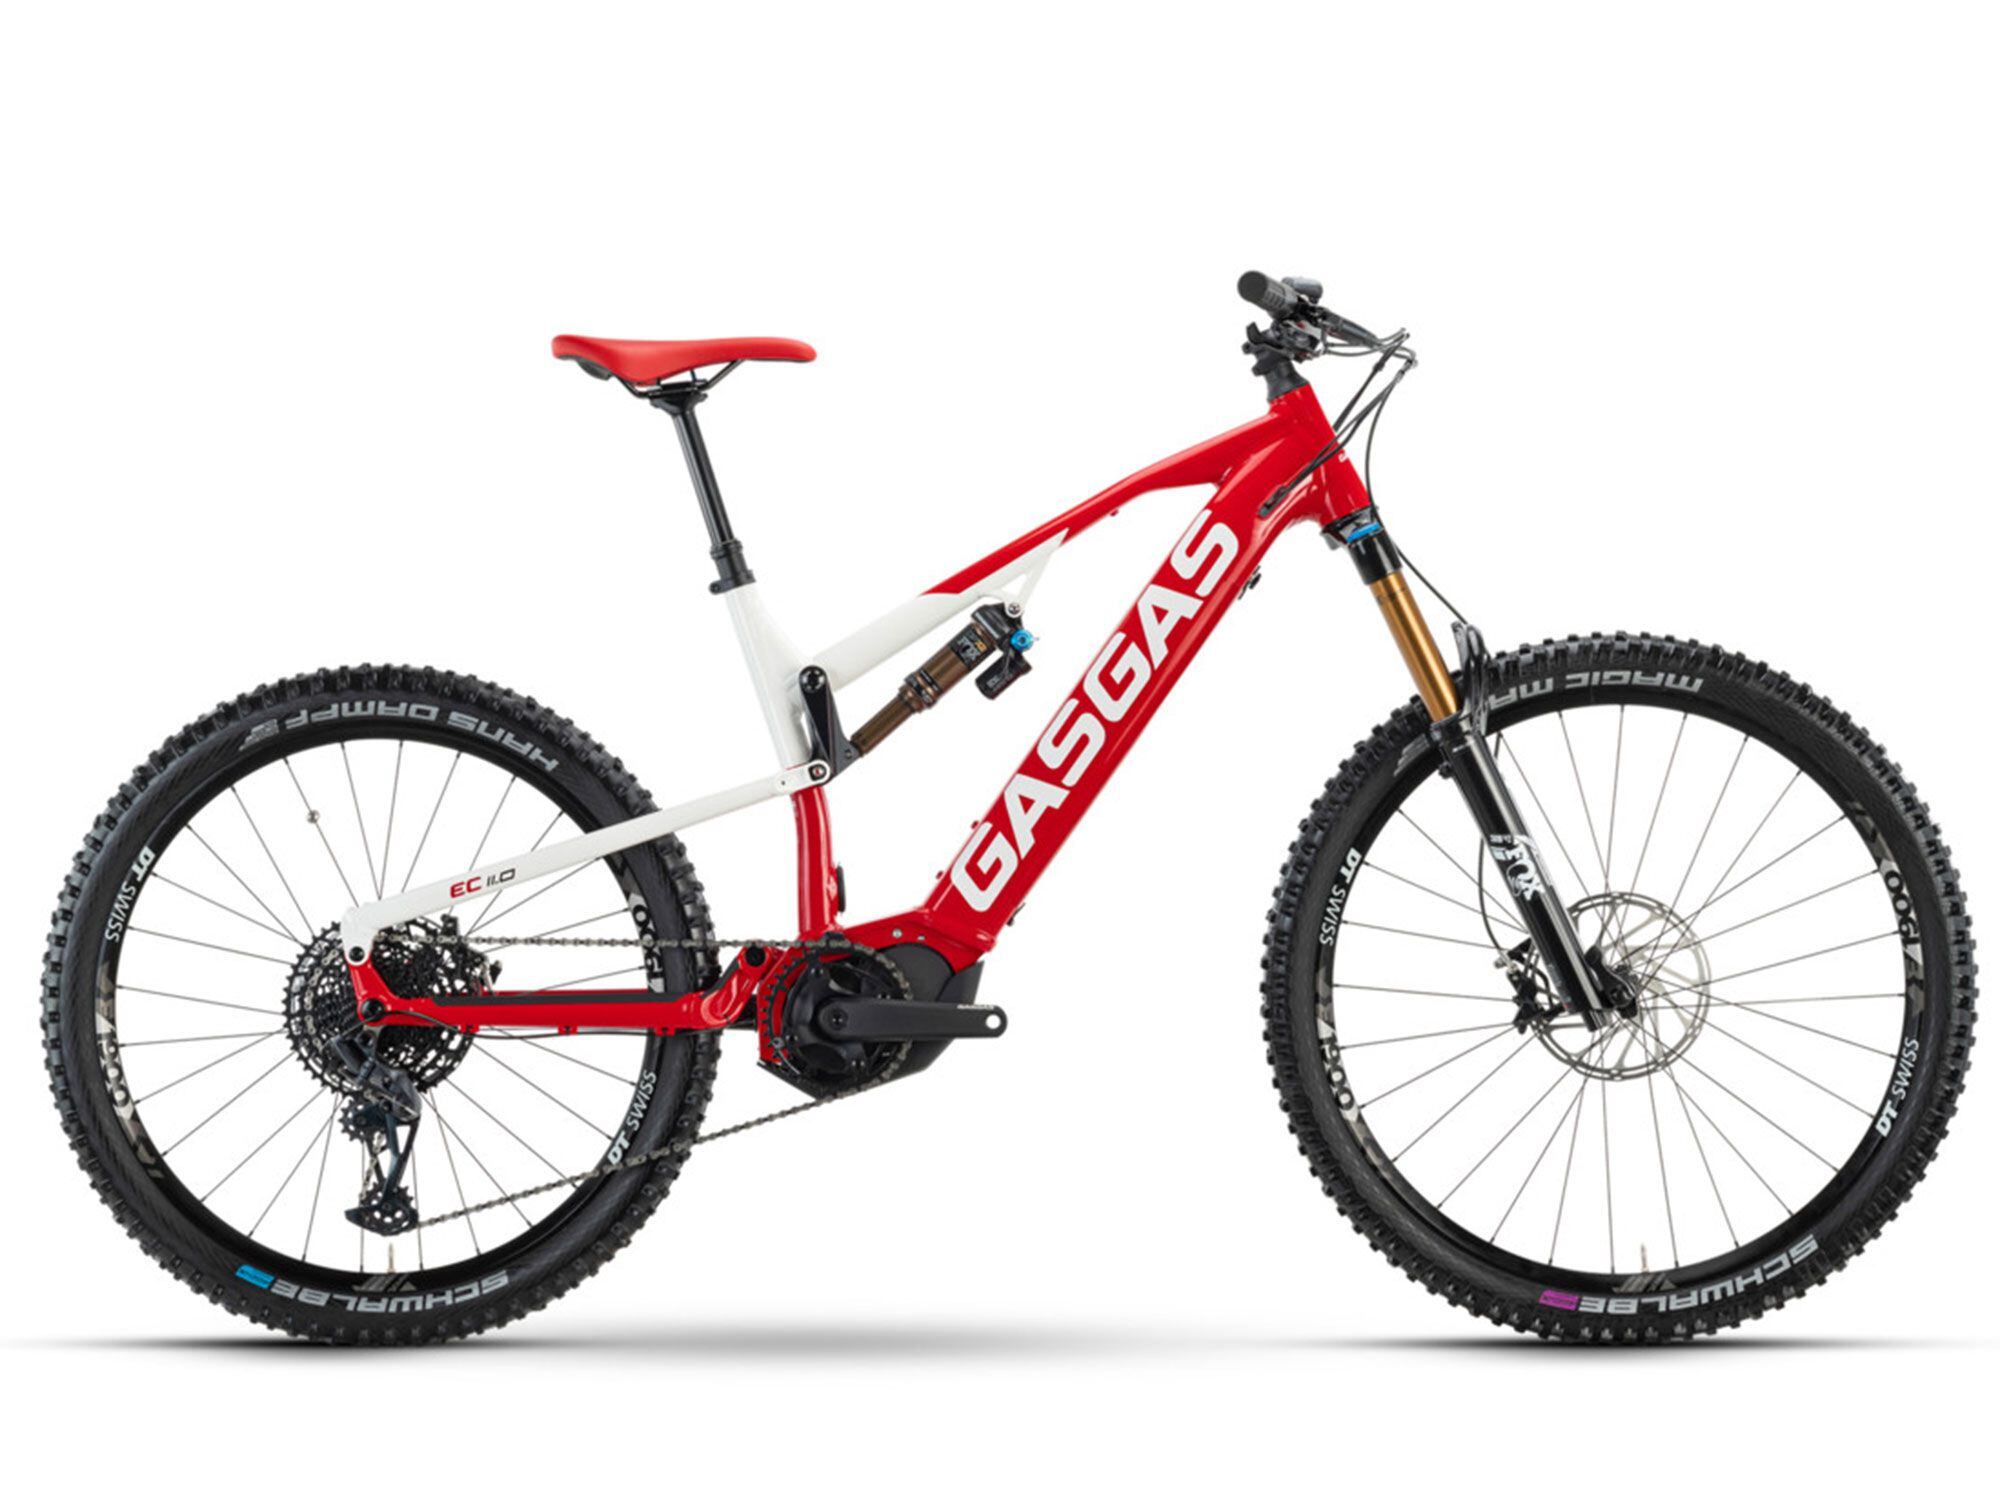 The top-of-the-line Enduro Cross 11.0 features sophisticated technology and a rugged design.